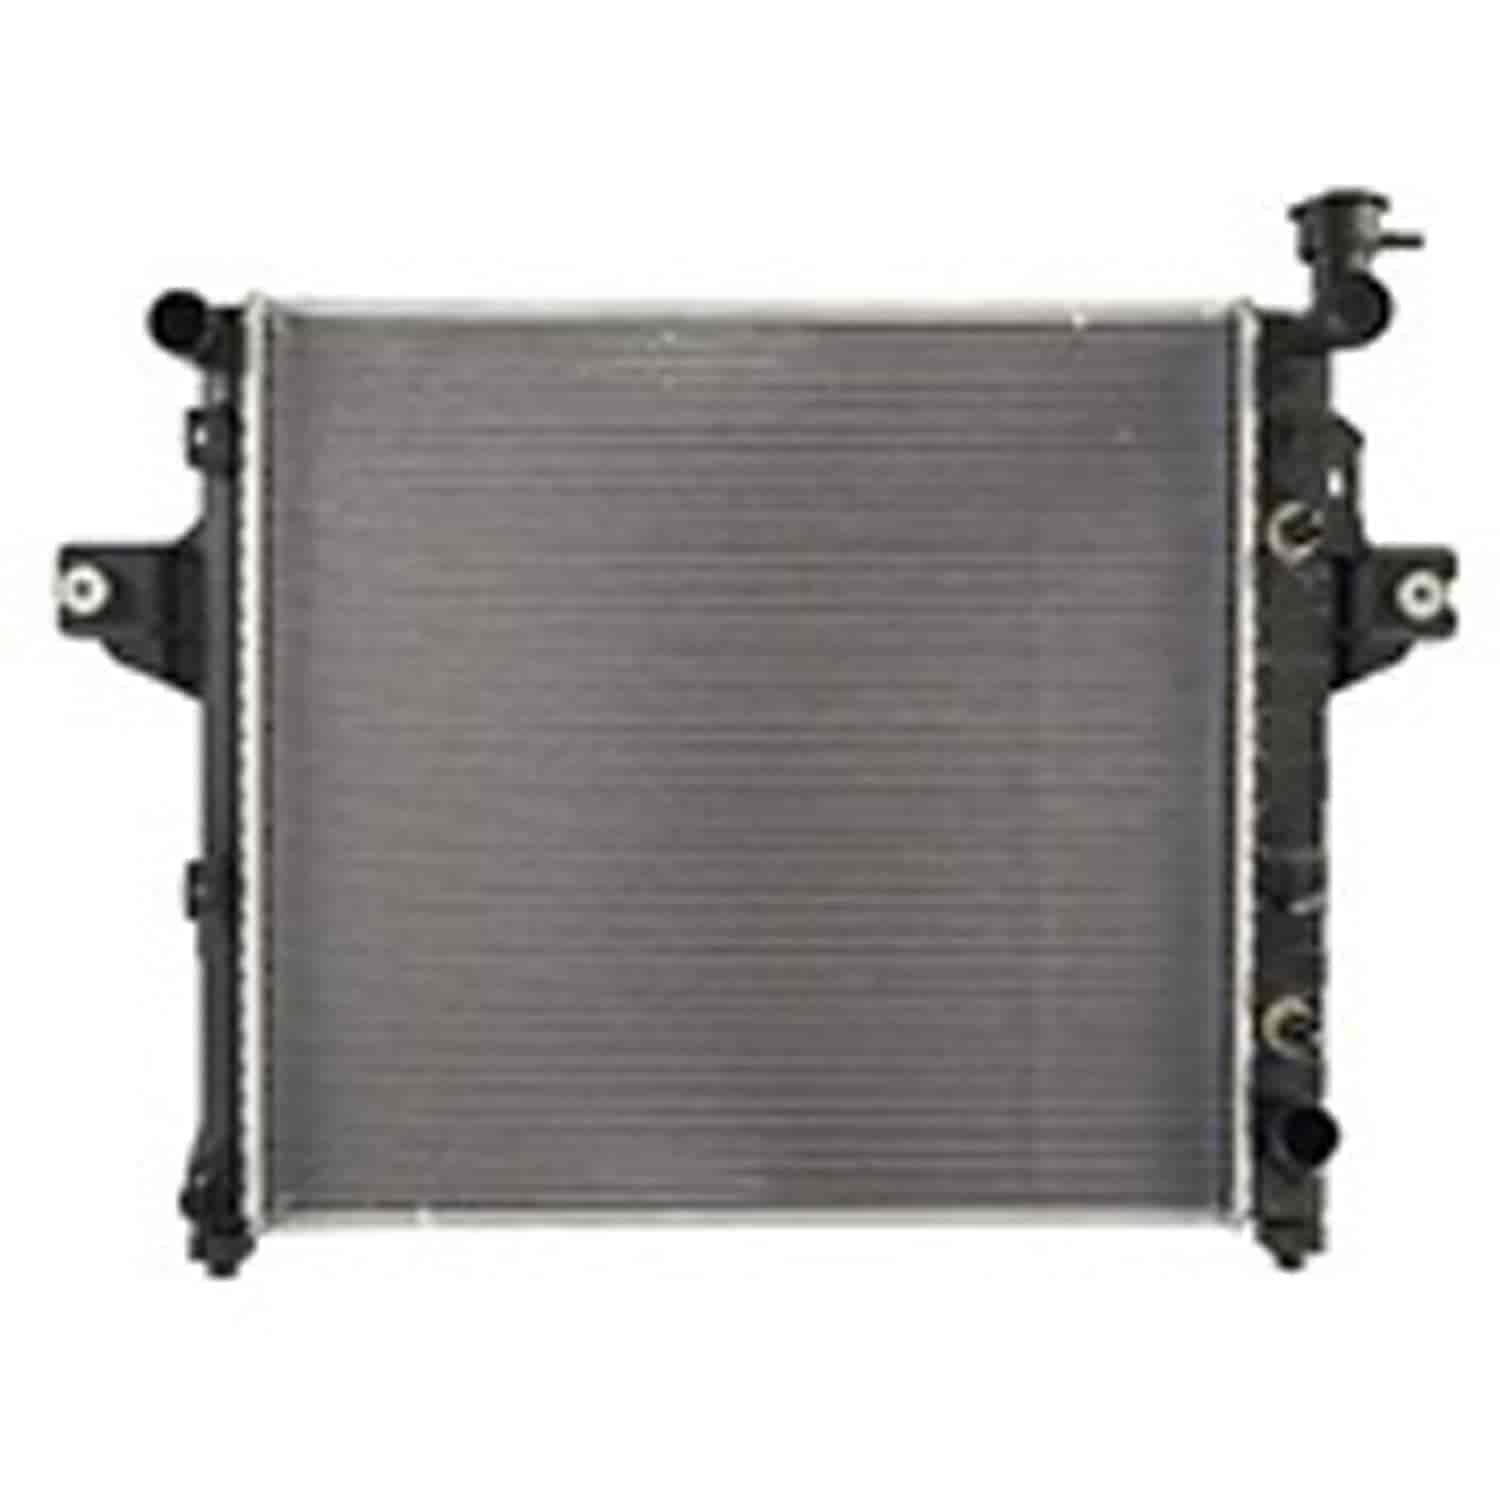 This 1 row radiator from Omix-ADA fits 99-04 Grand Cherokee 4.0L With or Without AC.